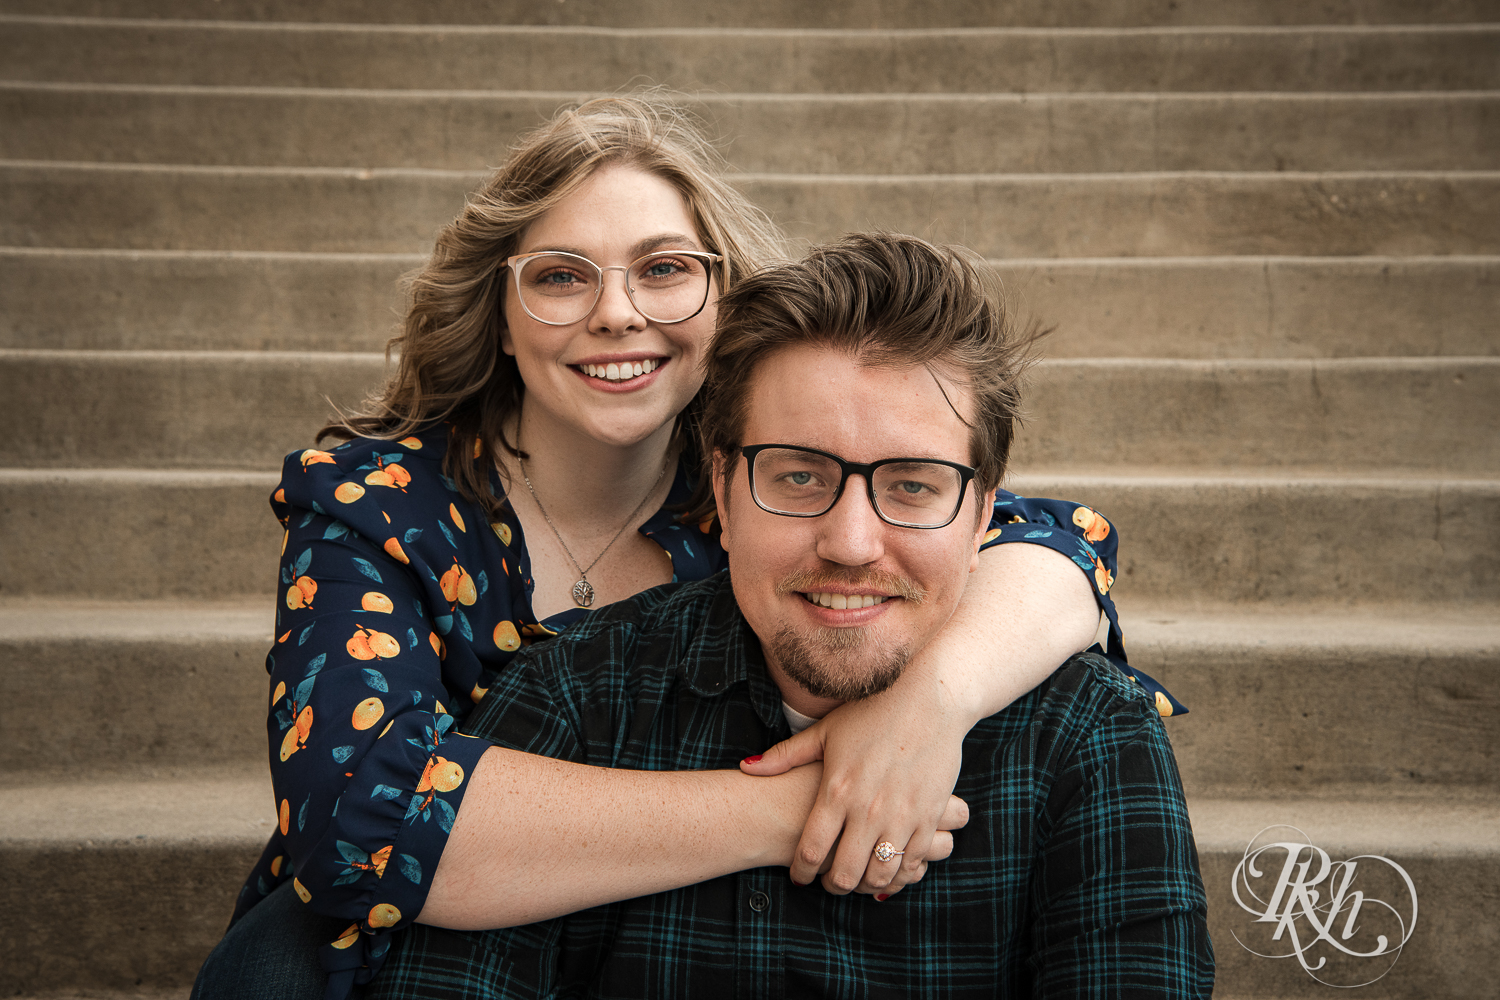 Blond woman with glasses and man with glasses smile on steps in Saint Paul, Minnesota.